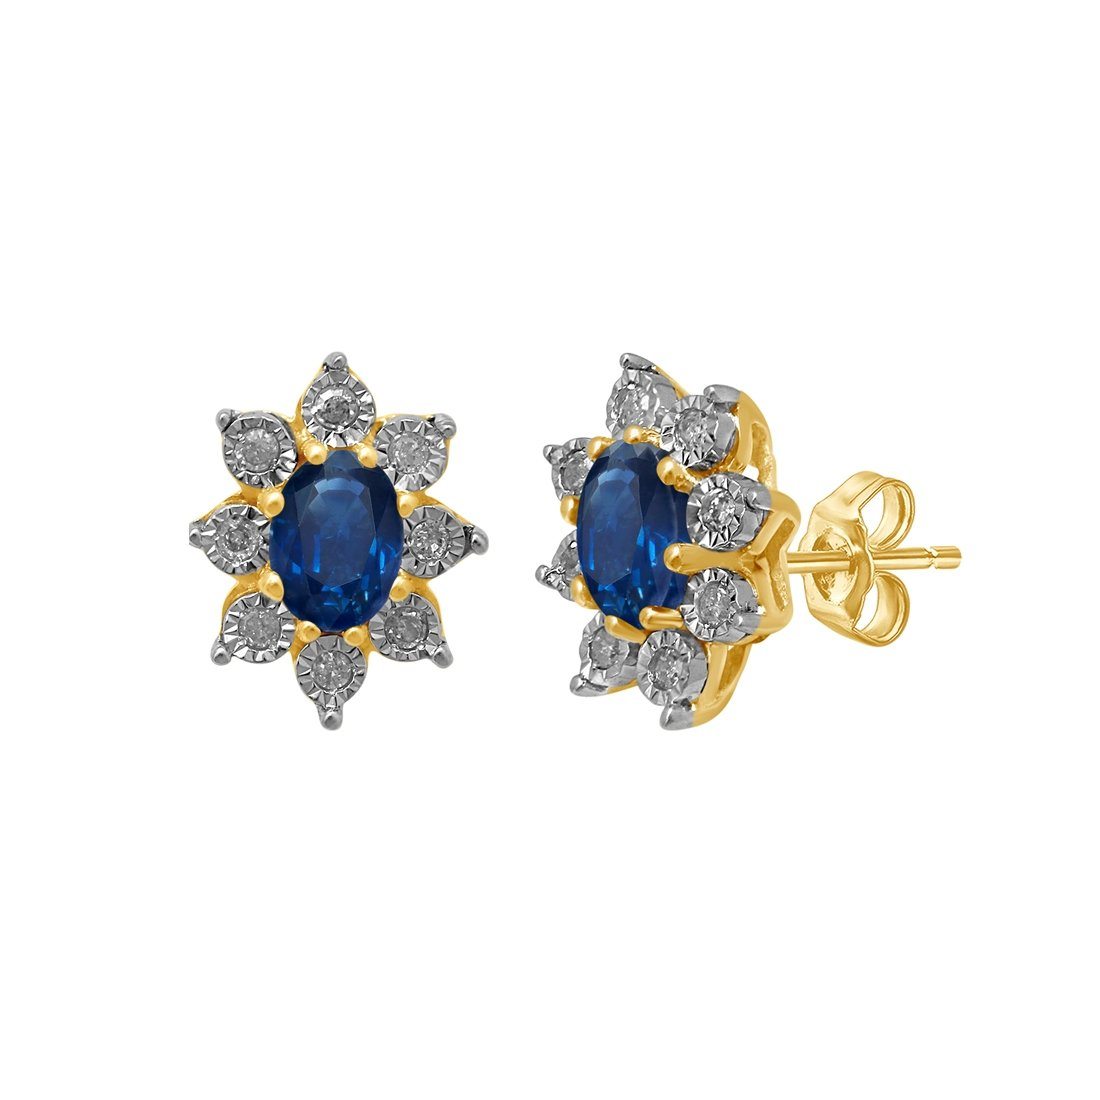 Bevilles 9ct Yellow Gold Sapphire and Diamond Earrings Stud